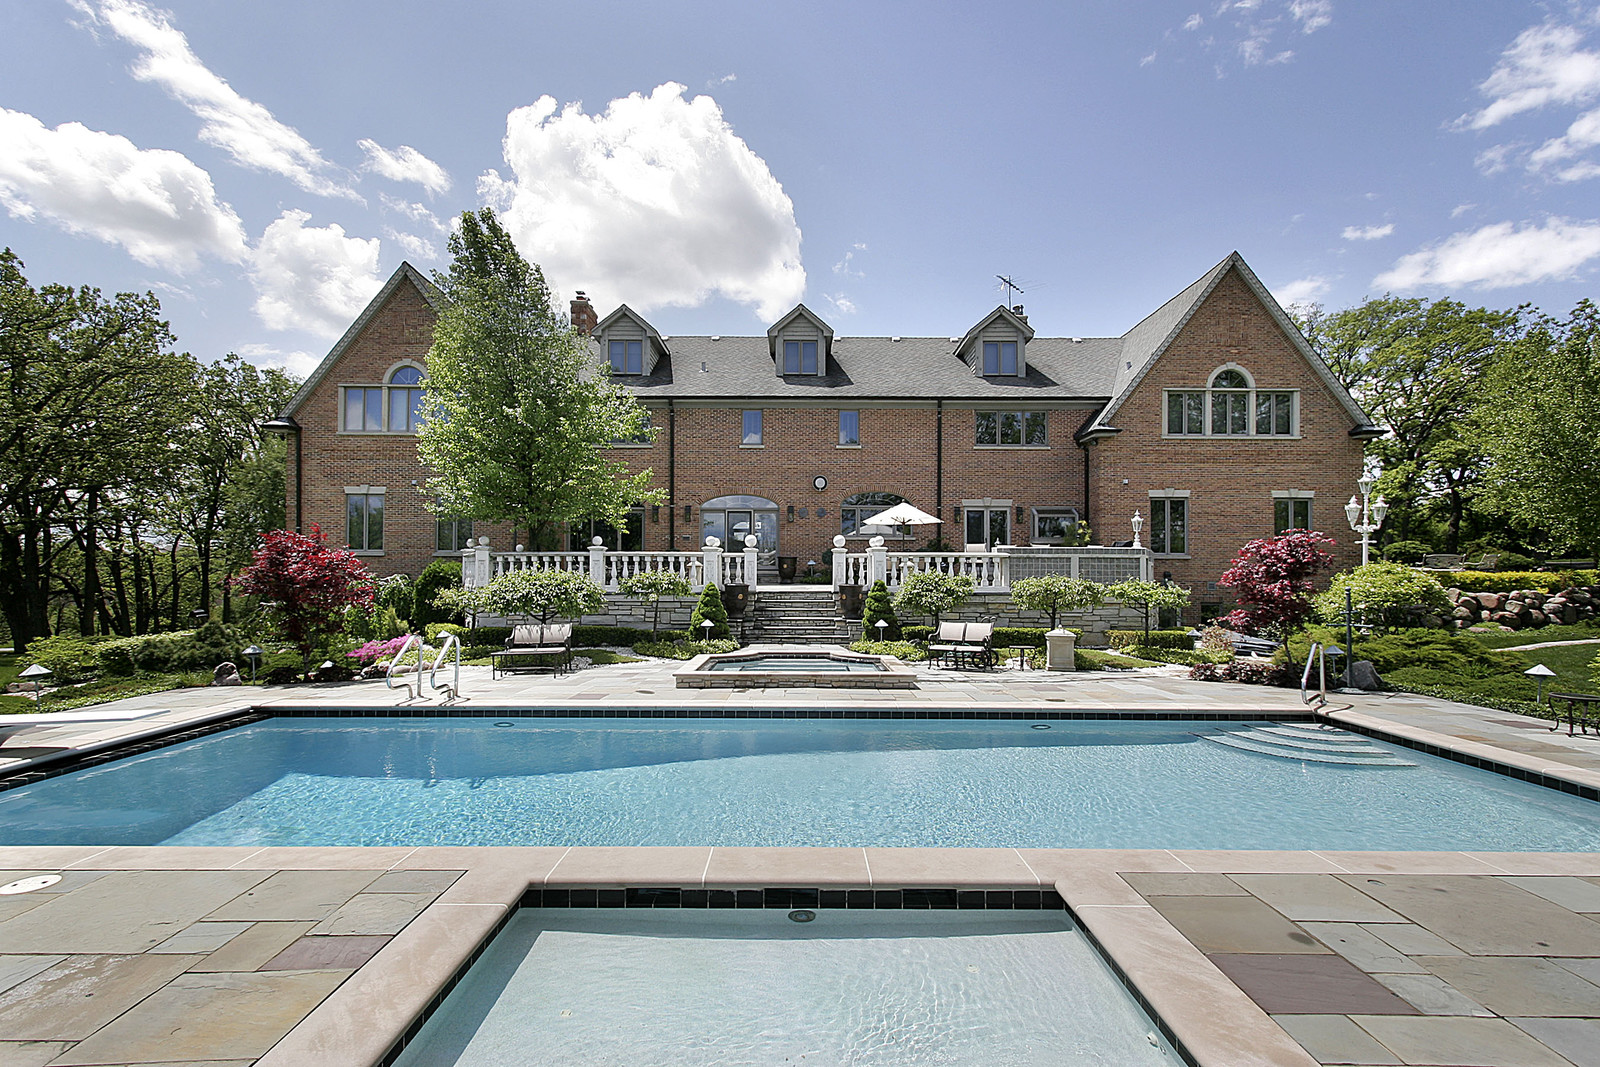 Sunny summer day, large brick house with ornate patio and large rectangle pool with adjoining square hot tub